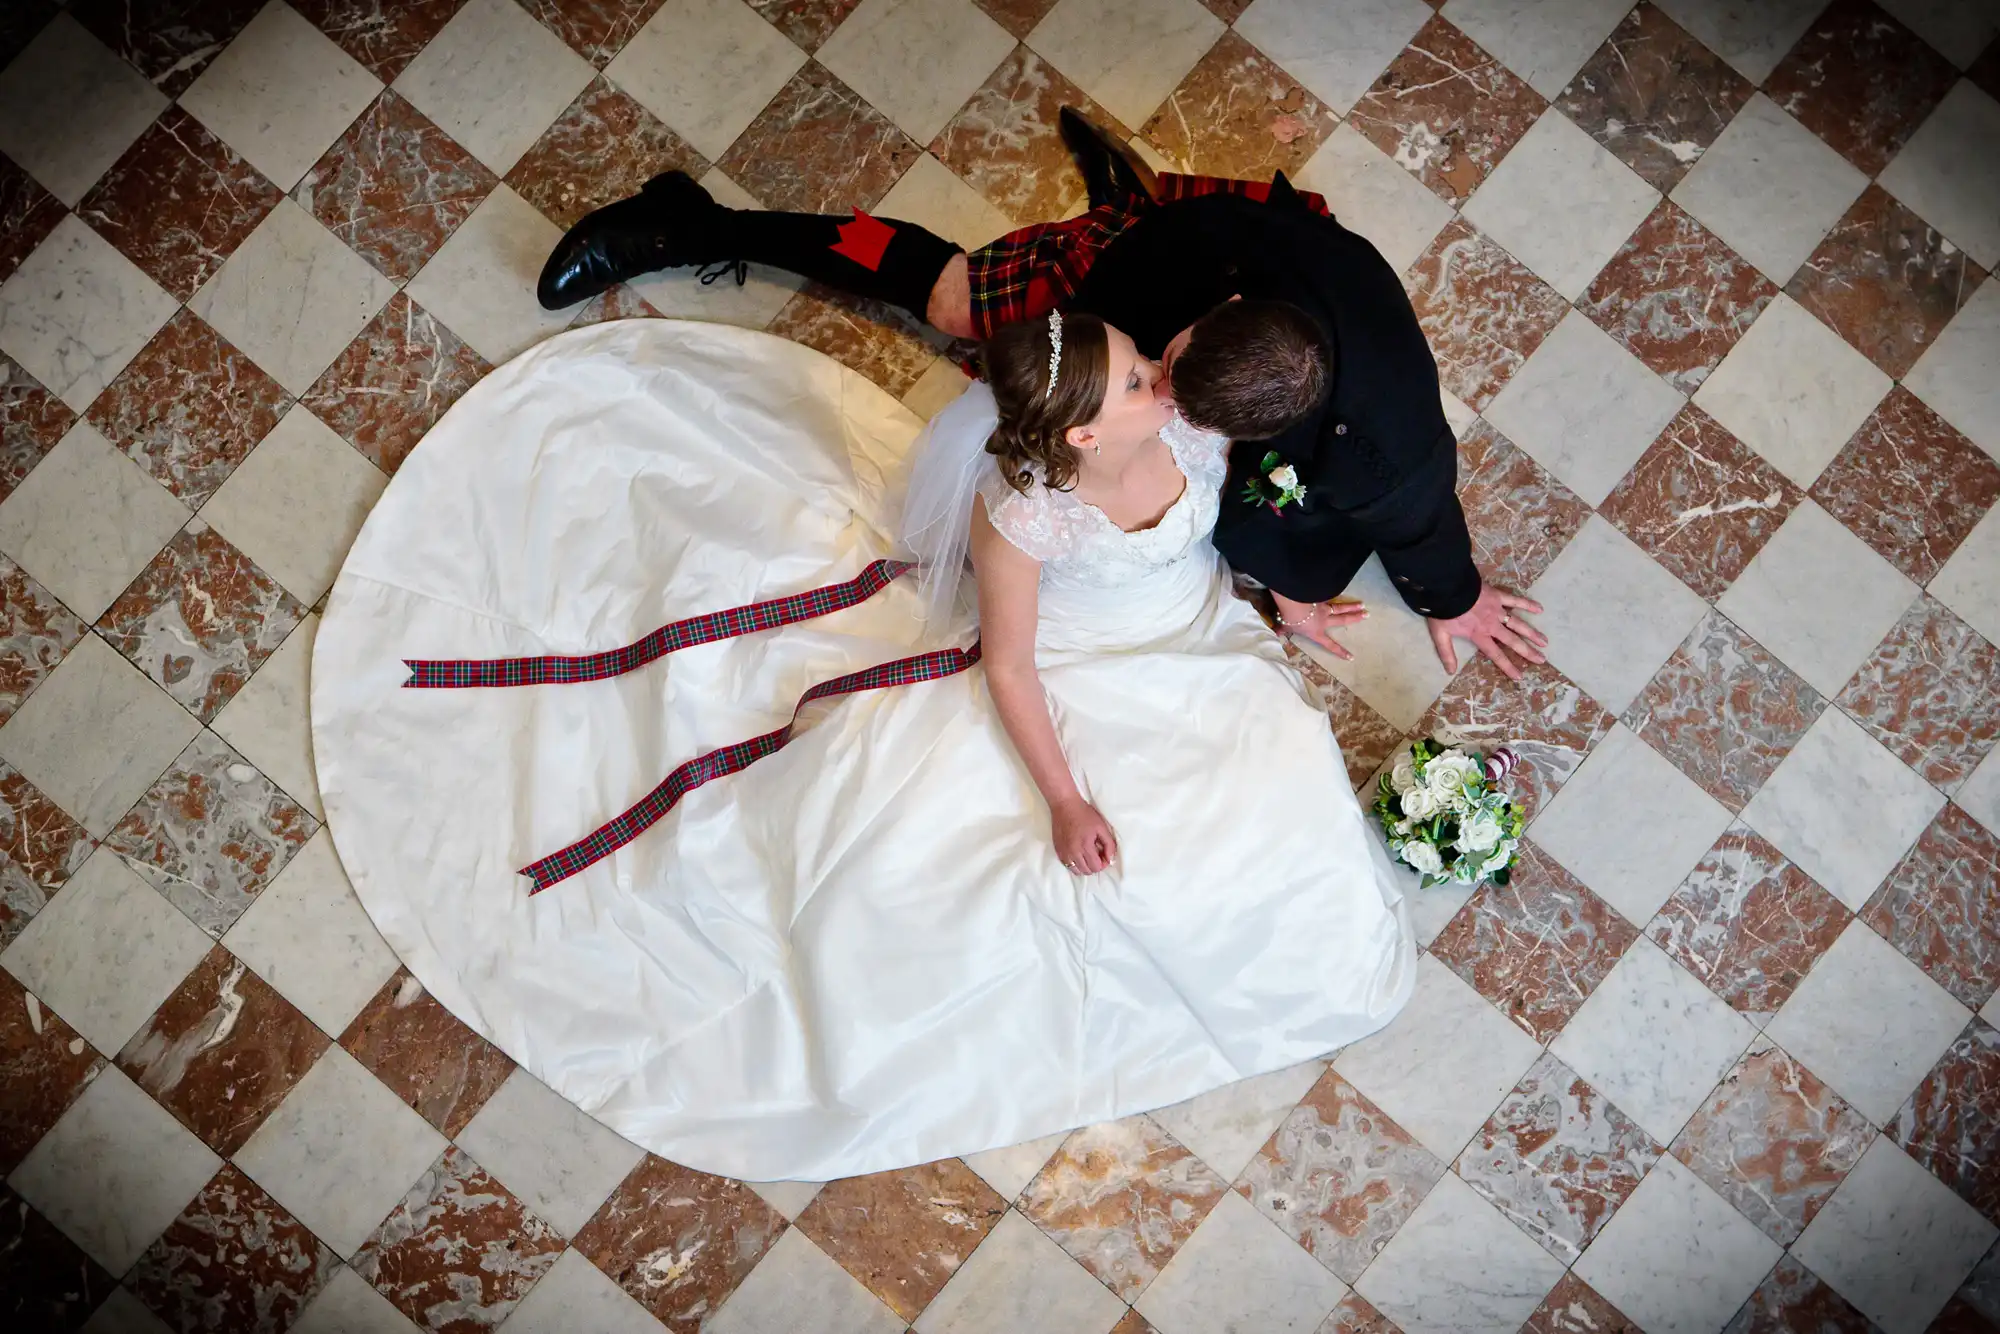 A bride and groom in wedding attire sharing a kiss on a checkered floor; the groom wears a kilt and the bride's dress has a long train.